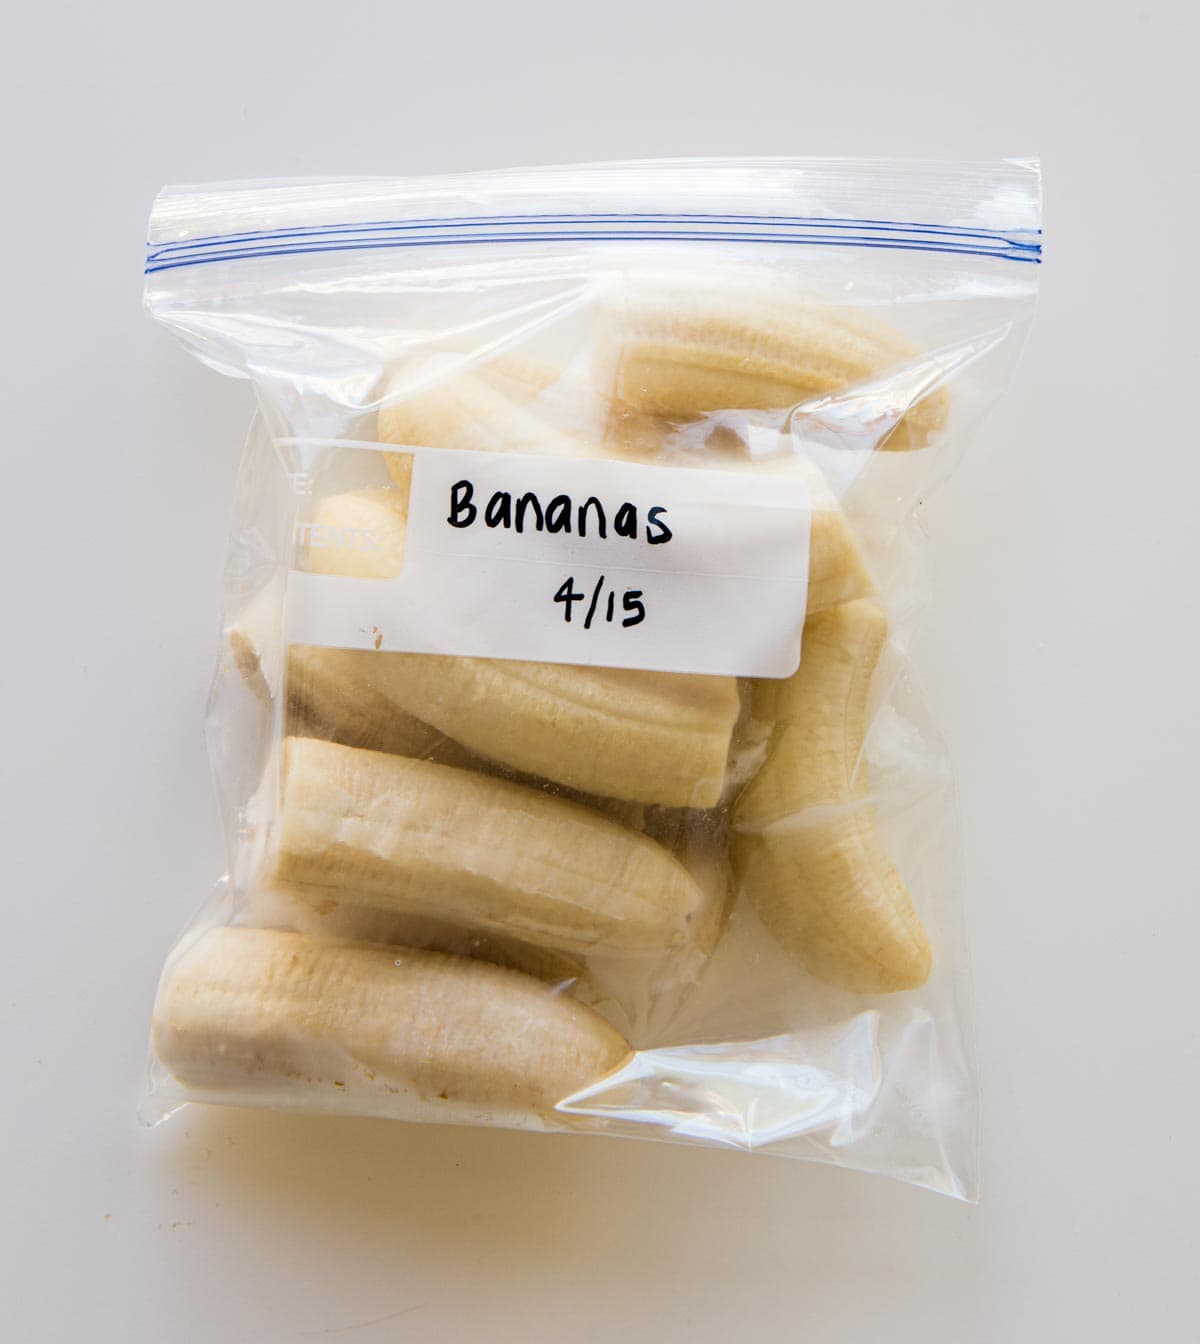 frozen, halved bananas in a freezer-safe plastic bag with the words Bananas 4/15 on it.